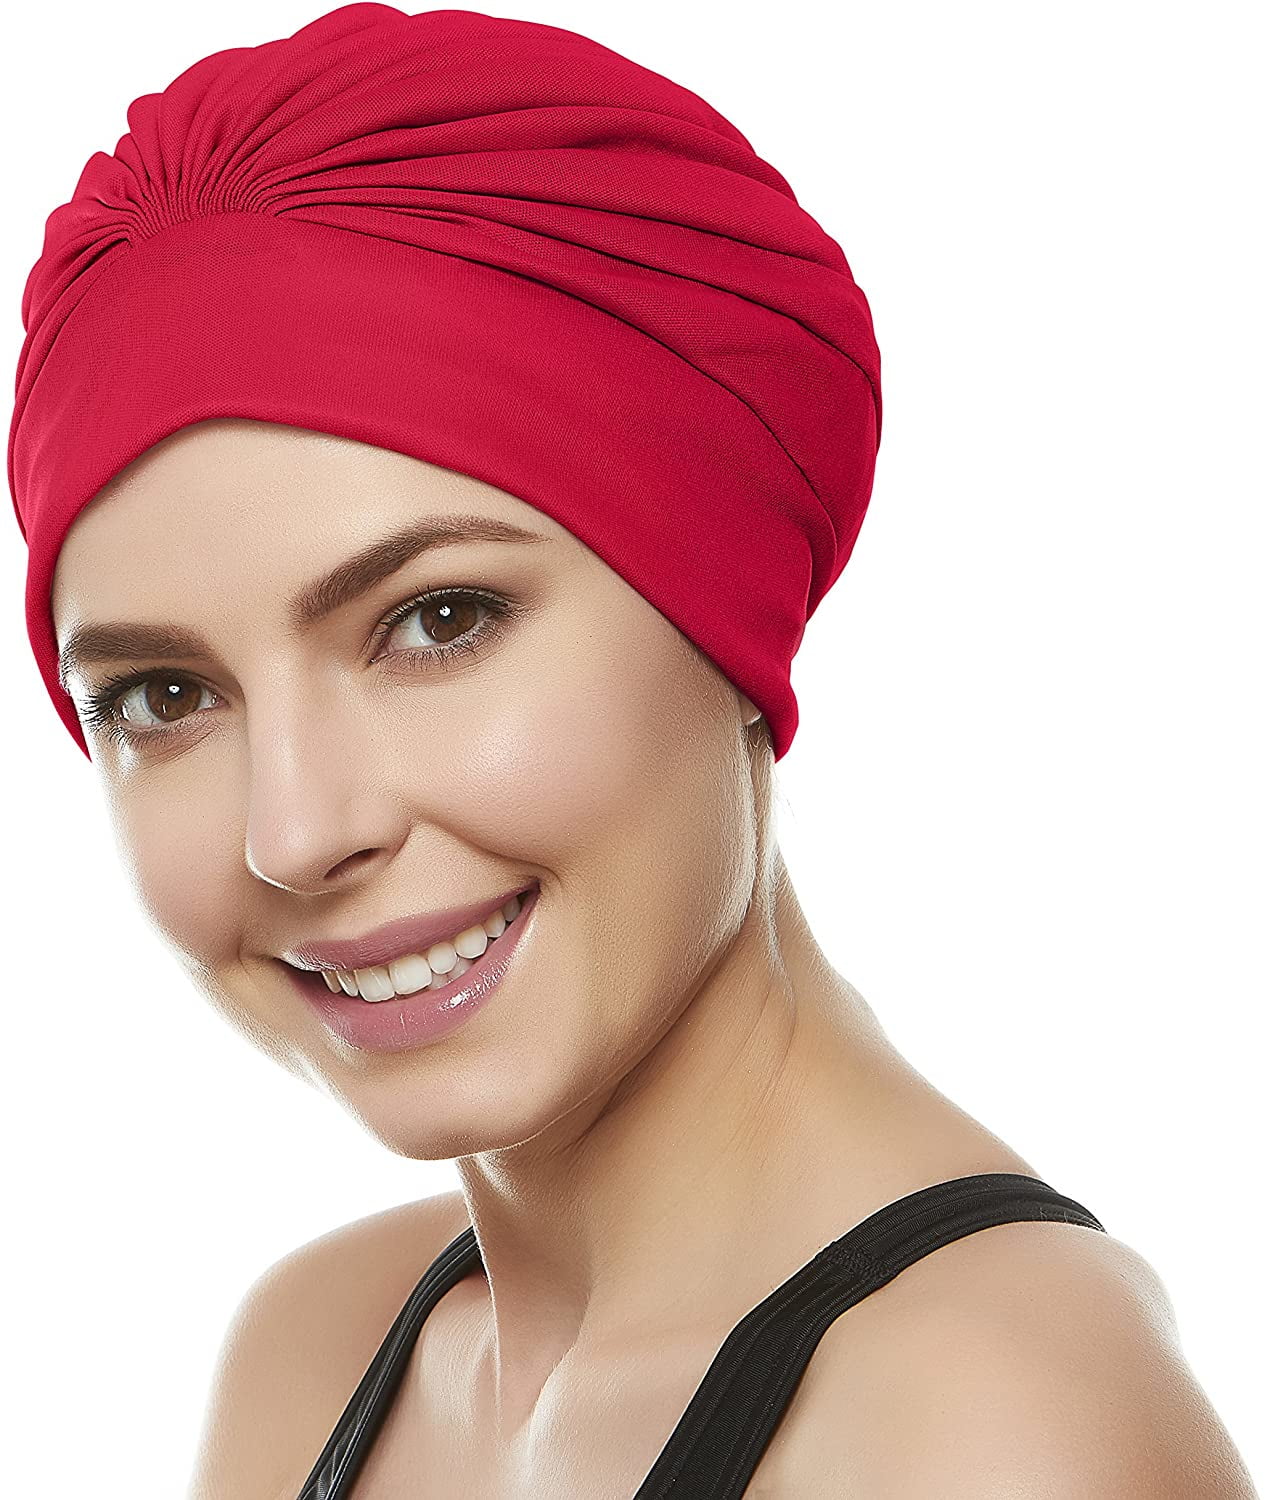 Swim Caps for Women Swimming Turban Polyester Latex Lined Pleated for Ladies(1pack)